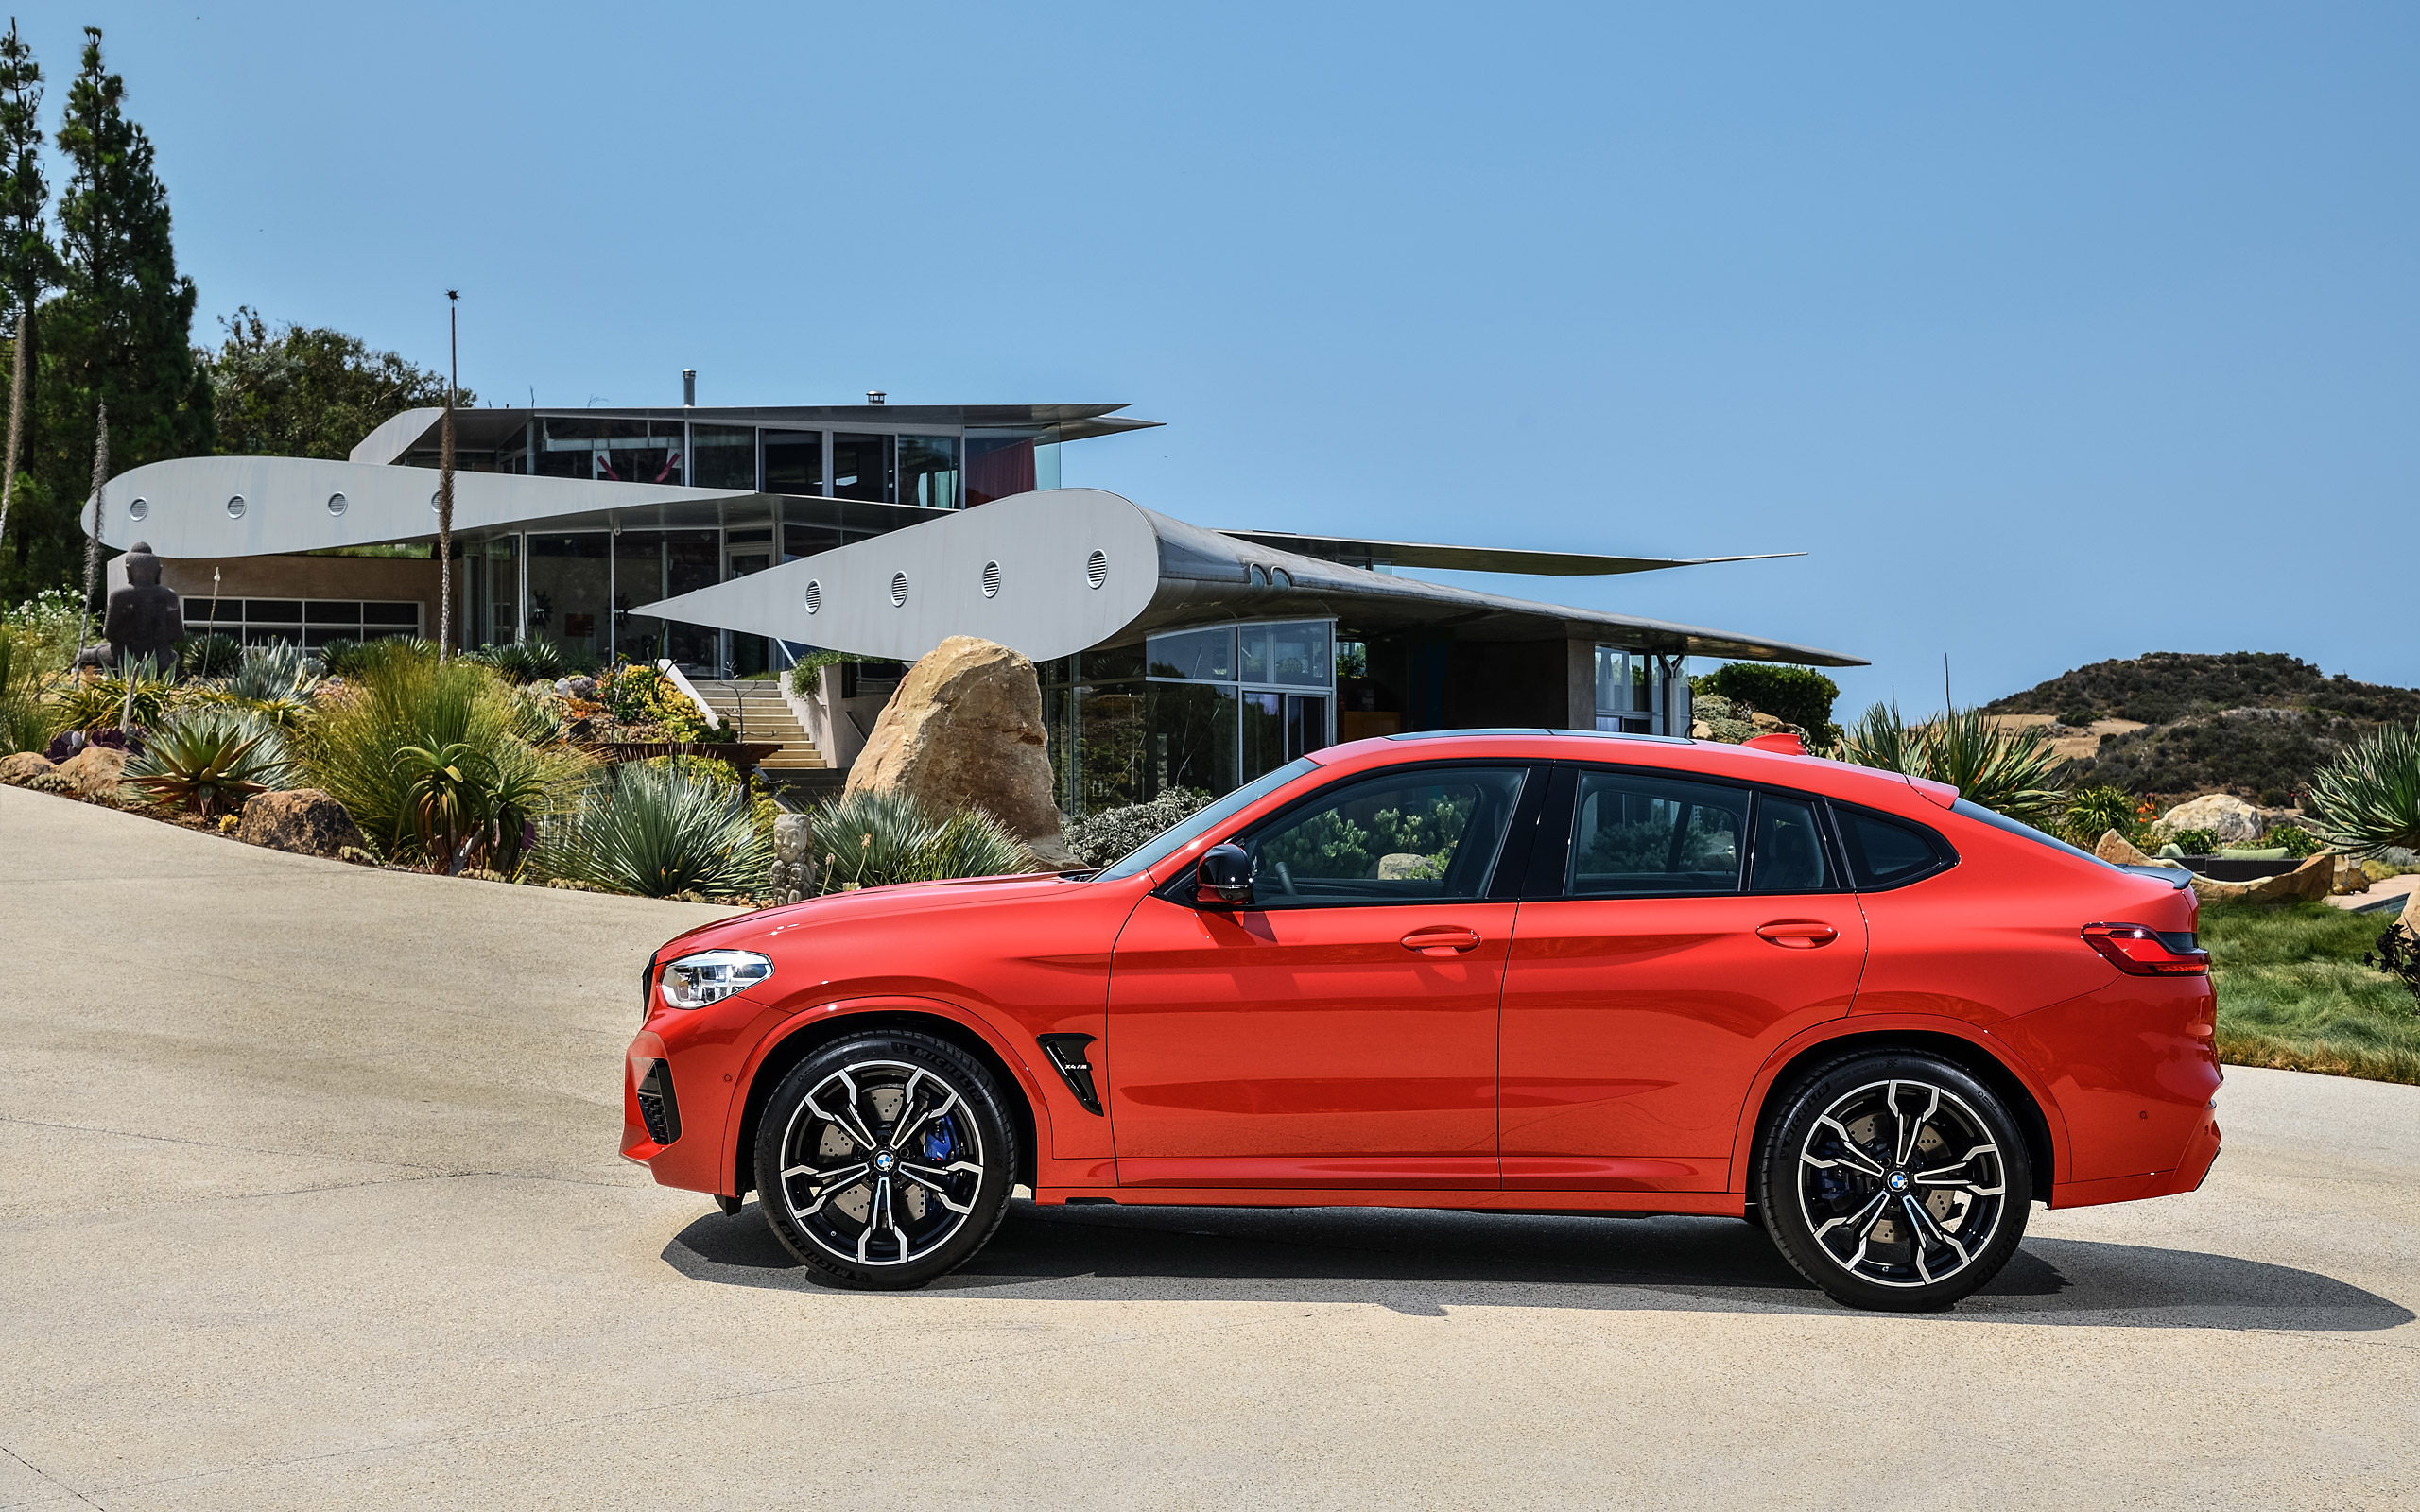  2020 BMW X4 M Competition Wallpaper.